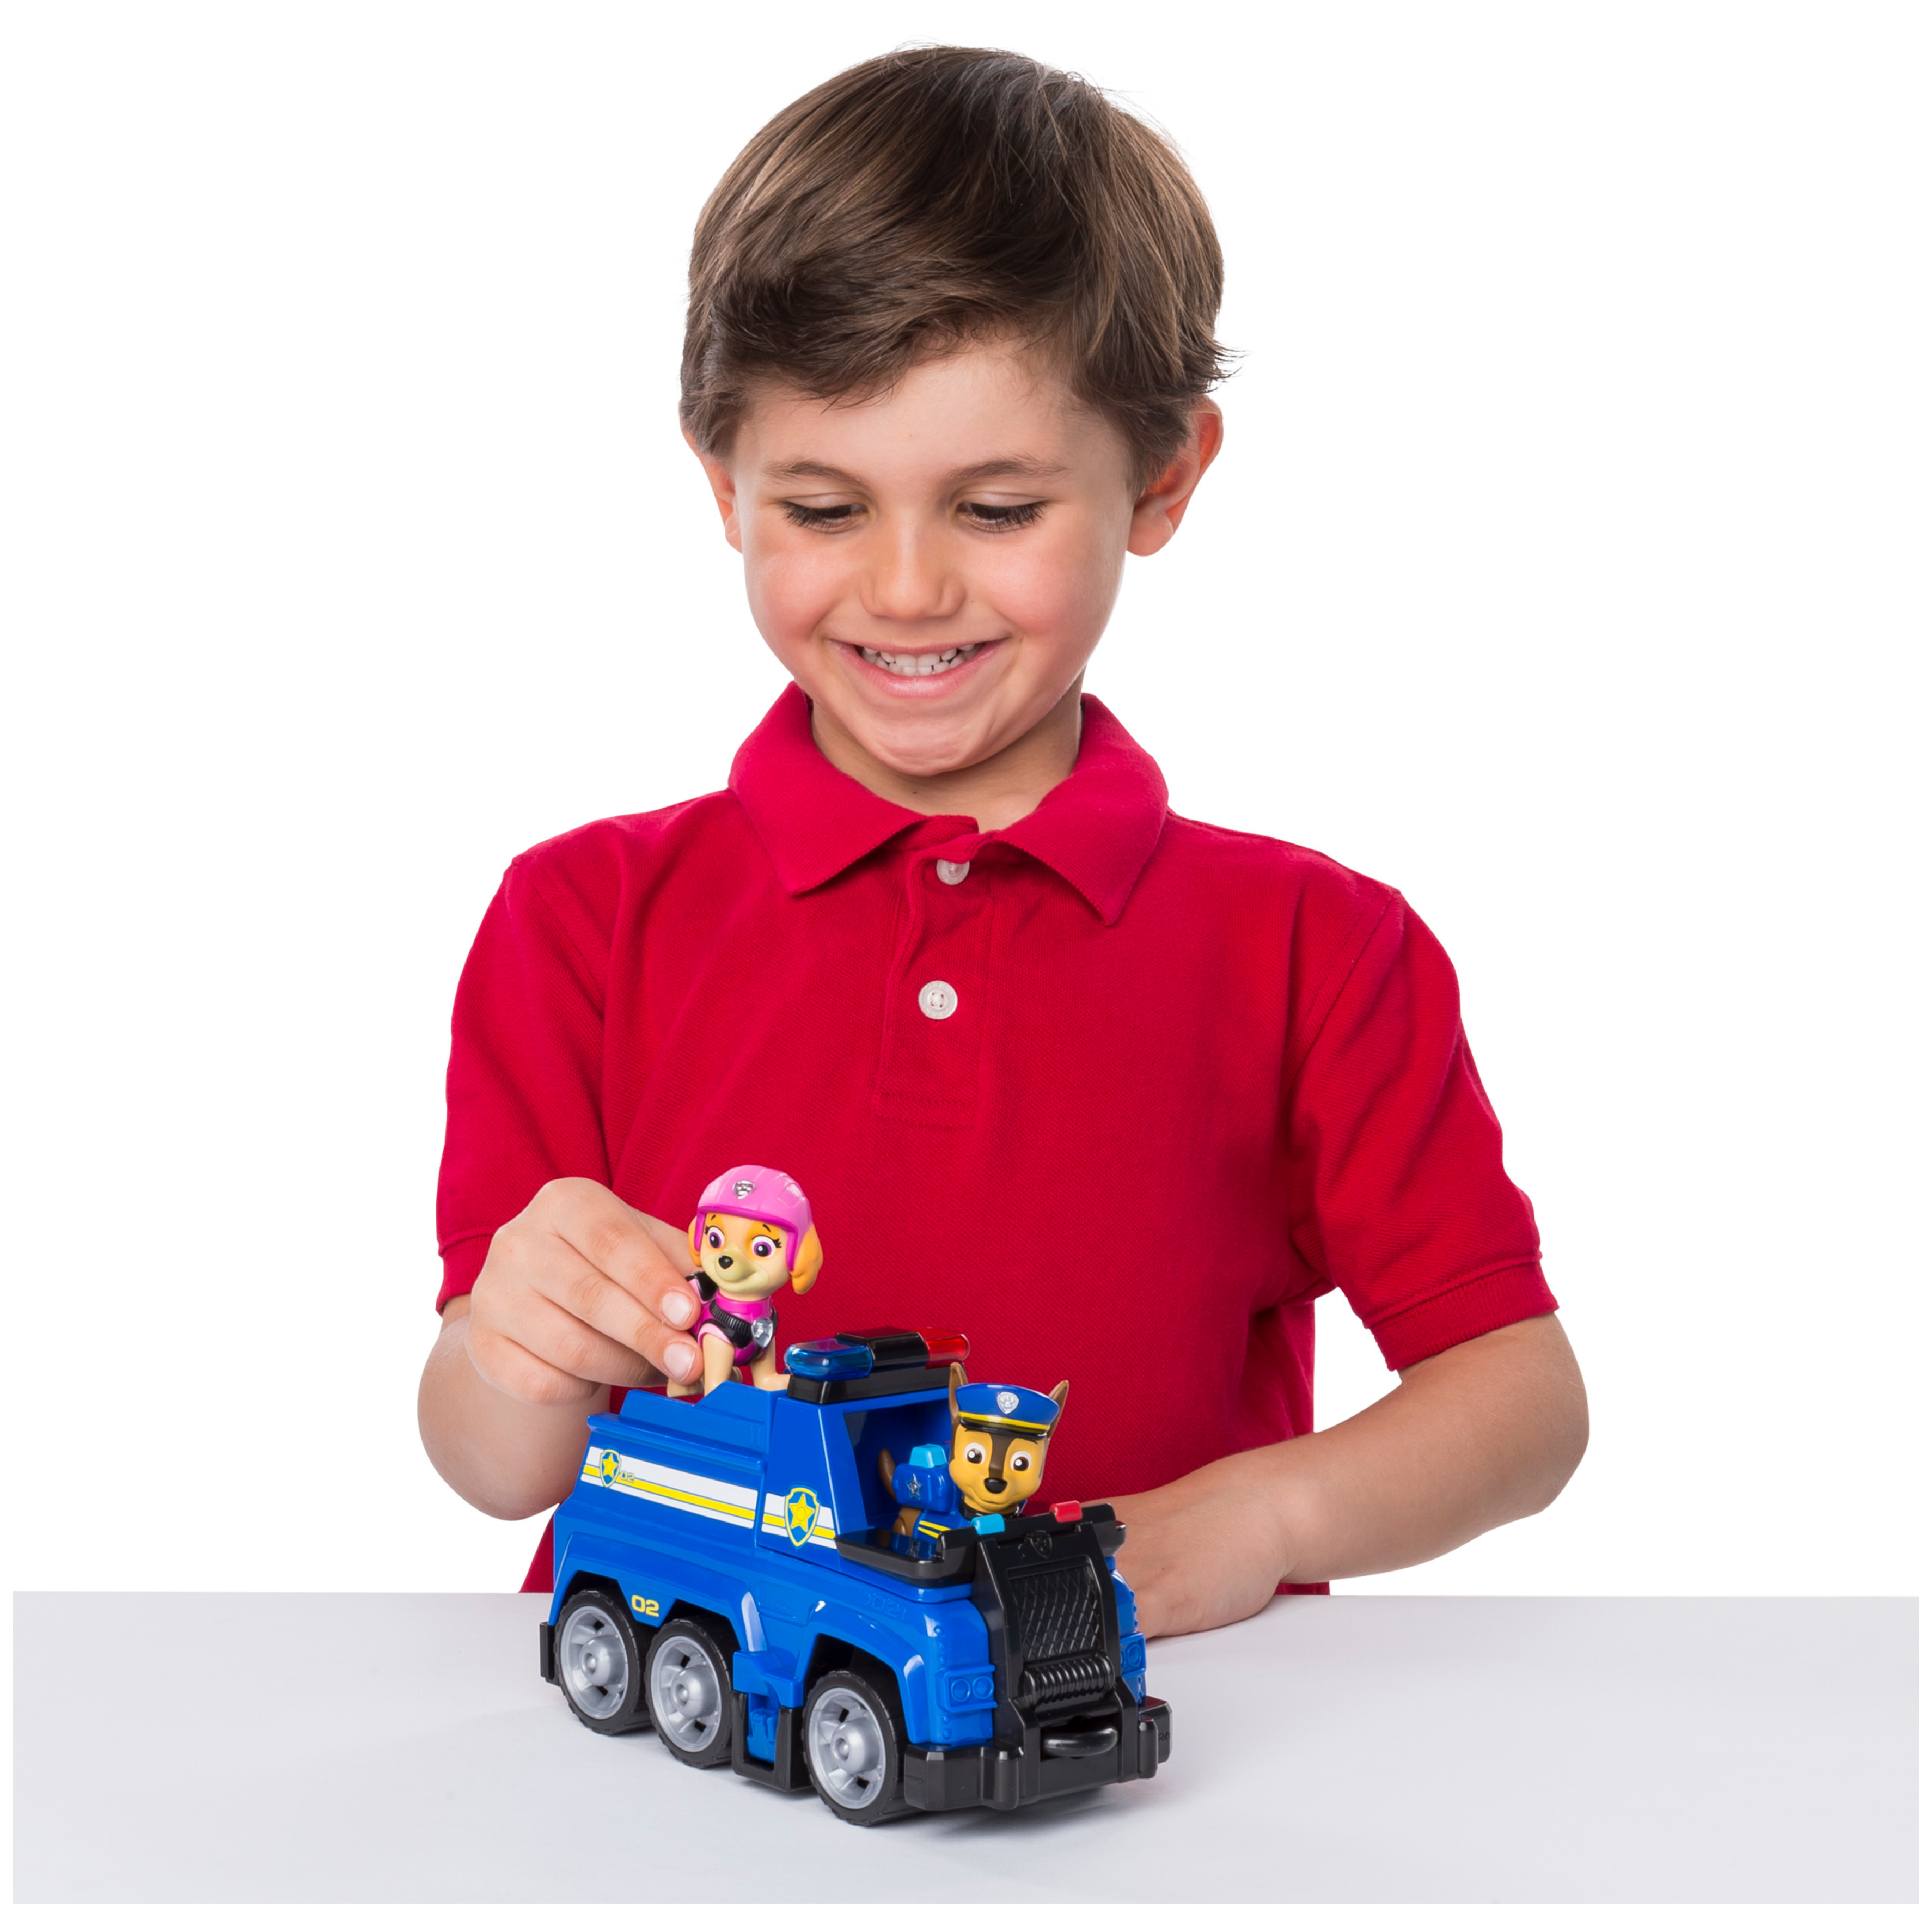 PAW Patrol Rescue, Chase's Ultimate Rescue Police Cruiser Vehicle, for Ages up - Walmart.com